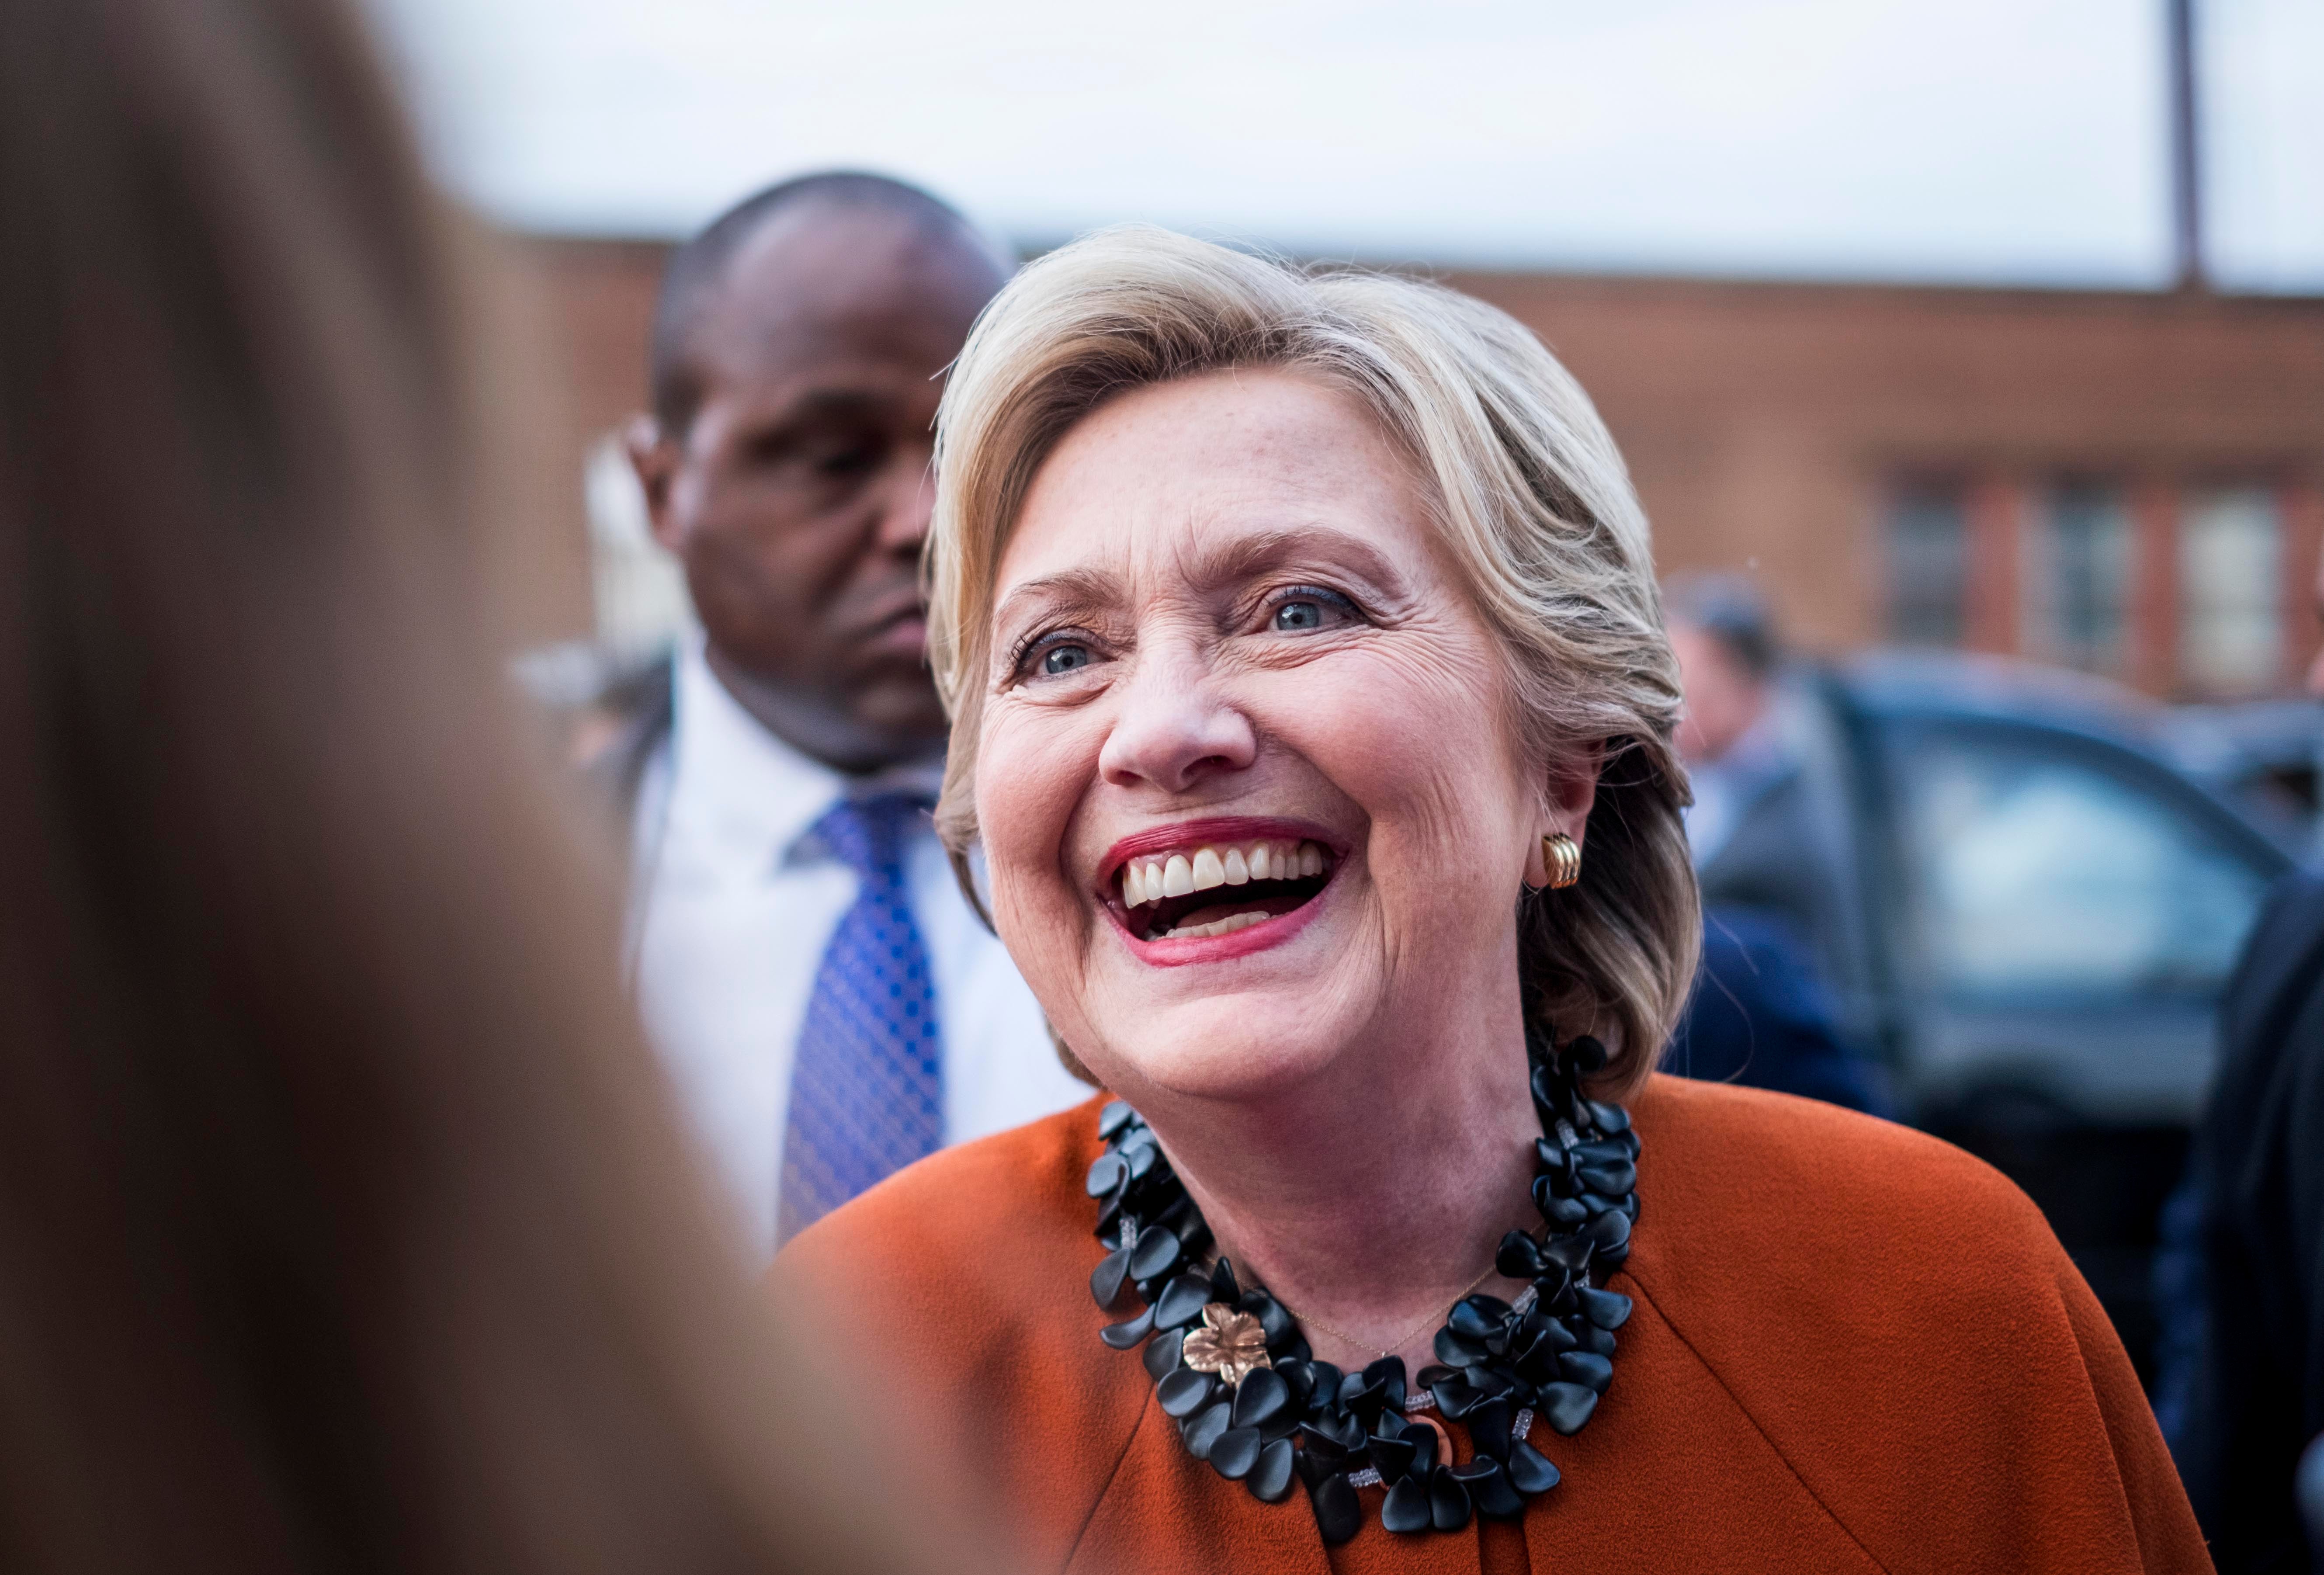 It's Official: Hillary Clinton Received More Votes Than Any Losing Candidate In U.S. History